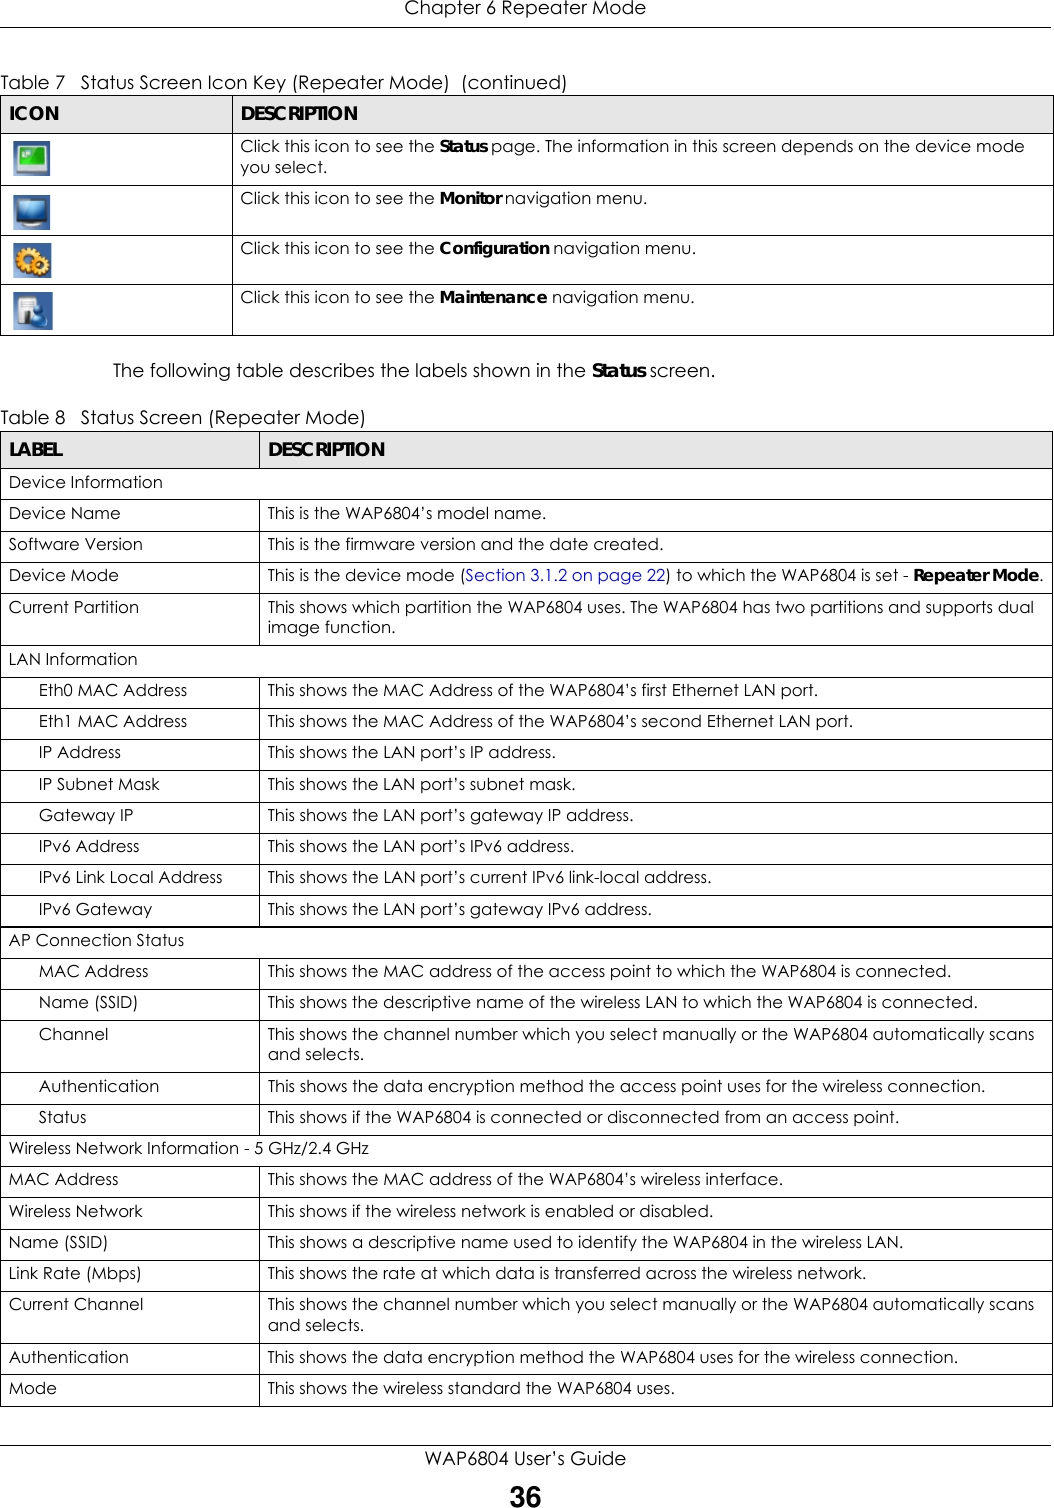 Chapter 6 Repeater ModeWAP6804 User’s Guide36The following table describes the labels shown in the Status screen.  Click this icon to see the Status page. The information in this screen depends on the device mode you select. Click this icon to see the Monitor navigation menu. Click this icon to see the Configuration navigation menu. Click this icon to see the Maintenance navigation menu. Table 7   Status Screen Icon Key (Repeater Mode)  (continued)ICON DESCRIPTIONTable 8   Status Screen (Repeater Mode) LABEL DESCRIPTIONDevice InformationDevice Name This is the WAP6804’s model name.Software Version This is the firmware version and the date created. Device Mode This is the device mode (Section 3.1.2 on page 22) to which the WAP6804 is set - Repeater Mode.Current Partition This shows which partition the WAP6804 uses. The WAP6804 has two partitions and supports dual image function.LAN InformationEth0 MAC Address This shows the MAC Address of the WAP6804’s first Ethernet LAN port.Eth1 MAC Address This shows the MAC Address of the WAP6804’s second Ethernet LAN port.IP Address This shows the LAN port’s IP address.IP Subnet Mask This shows the LAN port’s subnet mask.Gateway IP This shows the LAN port’s gateway IP address.IPv6 Address This shows the LAN port’s IPv6 address.IPv6 Link Local Address This shows the LAN port’s current IPv6 link-local address.IPv6 Gateway This shows the LAN port’s gateway IPv6 address.AP Connection StatusMAC Address This shows the MAC address of the access point to which the WAP6804 is connected.Name (SSID) This shows the descriptive name of the wireless LAN to which the WAP6804 is connected.Channel This shows the channel number which you select manually or the WAP6804 automatically scans and selects.Authentication This shows the data encryption method the access point uses for the wireless connection.Status This shows if the WAP6804 is connected or disconnected from an access point.Wireless Network Information - 5 GHz/2.4 GHzMAC Address This shows the MAC address of the WAP6804’s wireless interface.Wireless Network This shows if the wireless network is enabled or disabled.Name (SSID) This shows a descriptive name used to identify the WAP6804 in the wireless LAN. Link Rate (Mbps) This shows the rate at which data is transferred across the wireless network.Current Channel This shows the channel number which you select manually or the WAP6804 automatically scans and selects.Authentication This shows the data encryption method the WAP6804 uses for the wireless connection.Mode This shows the wireless standard the WAP6804 uses.